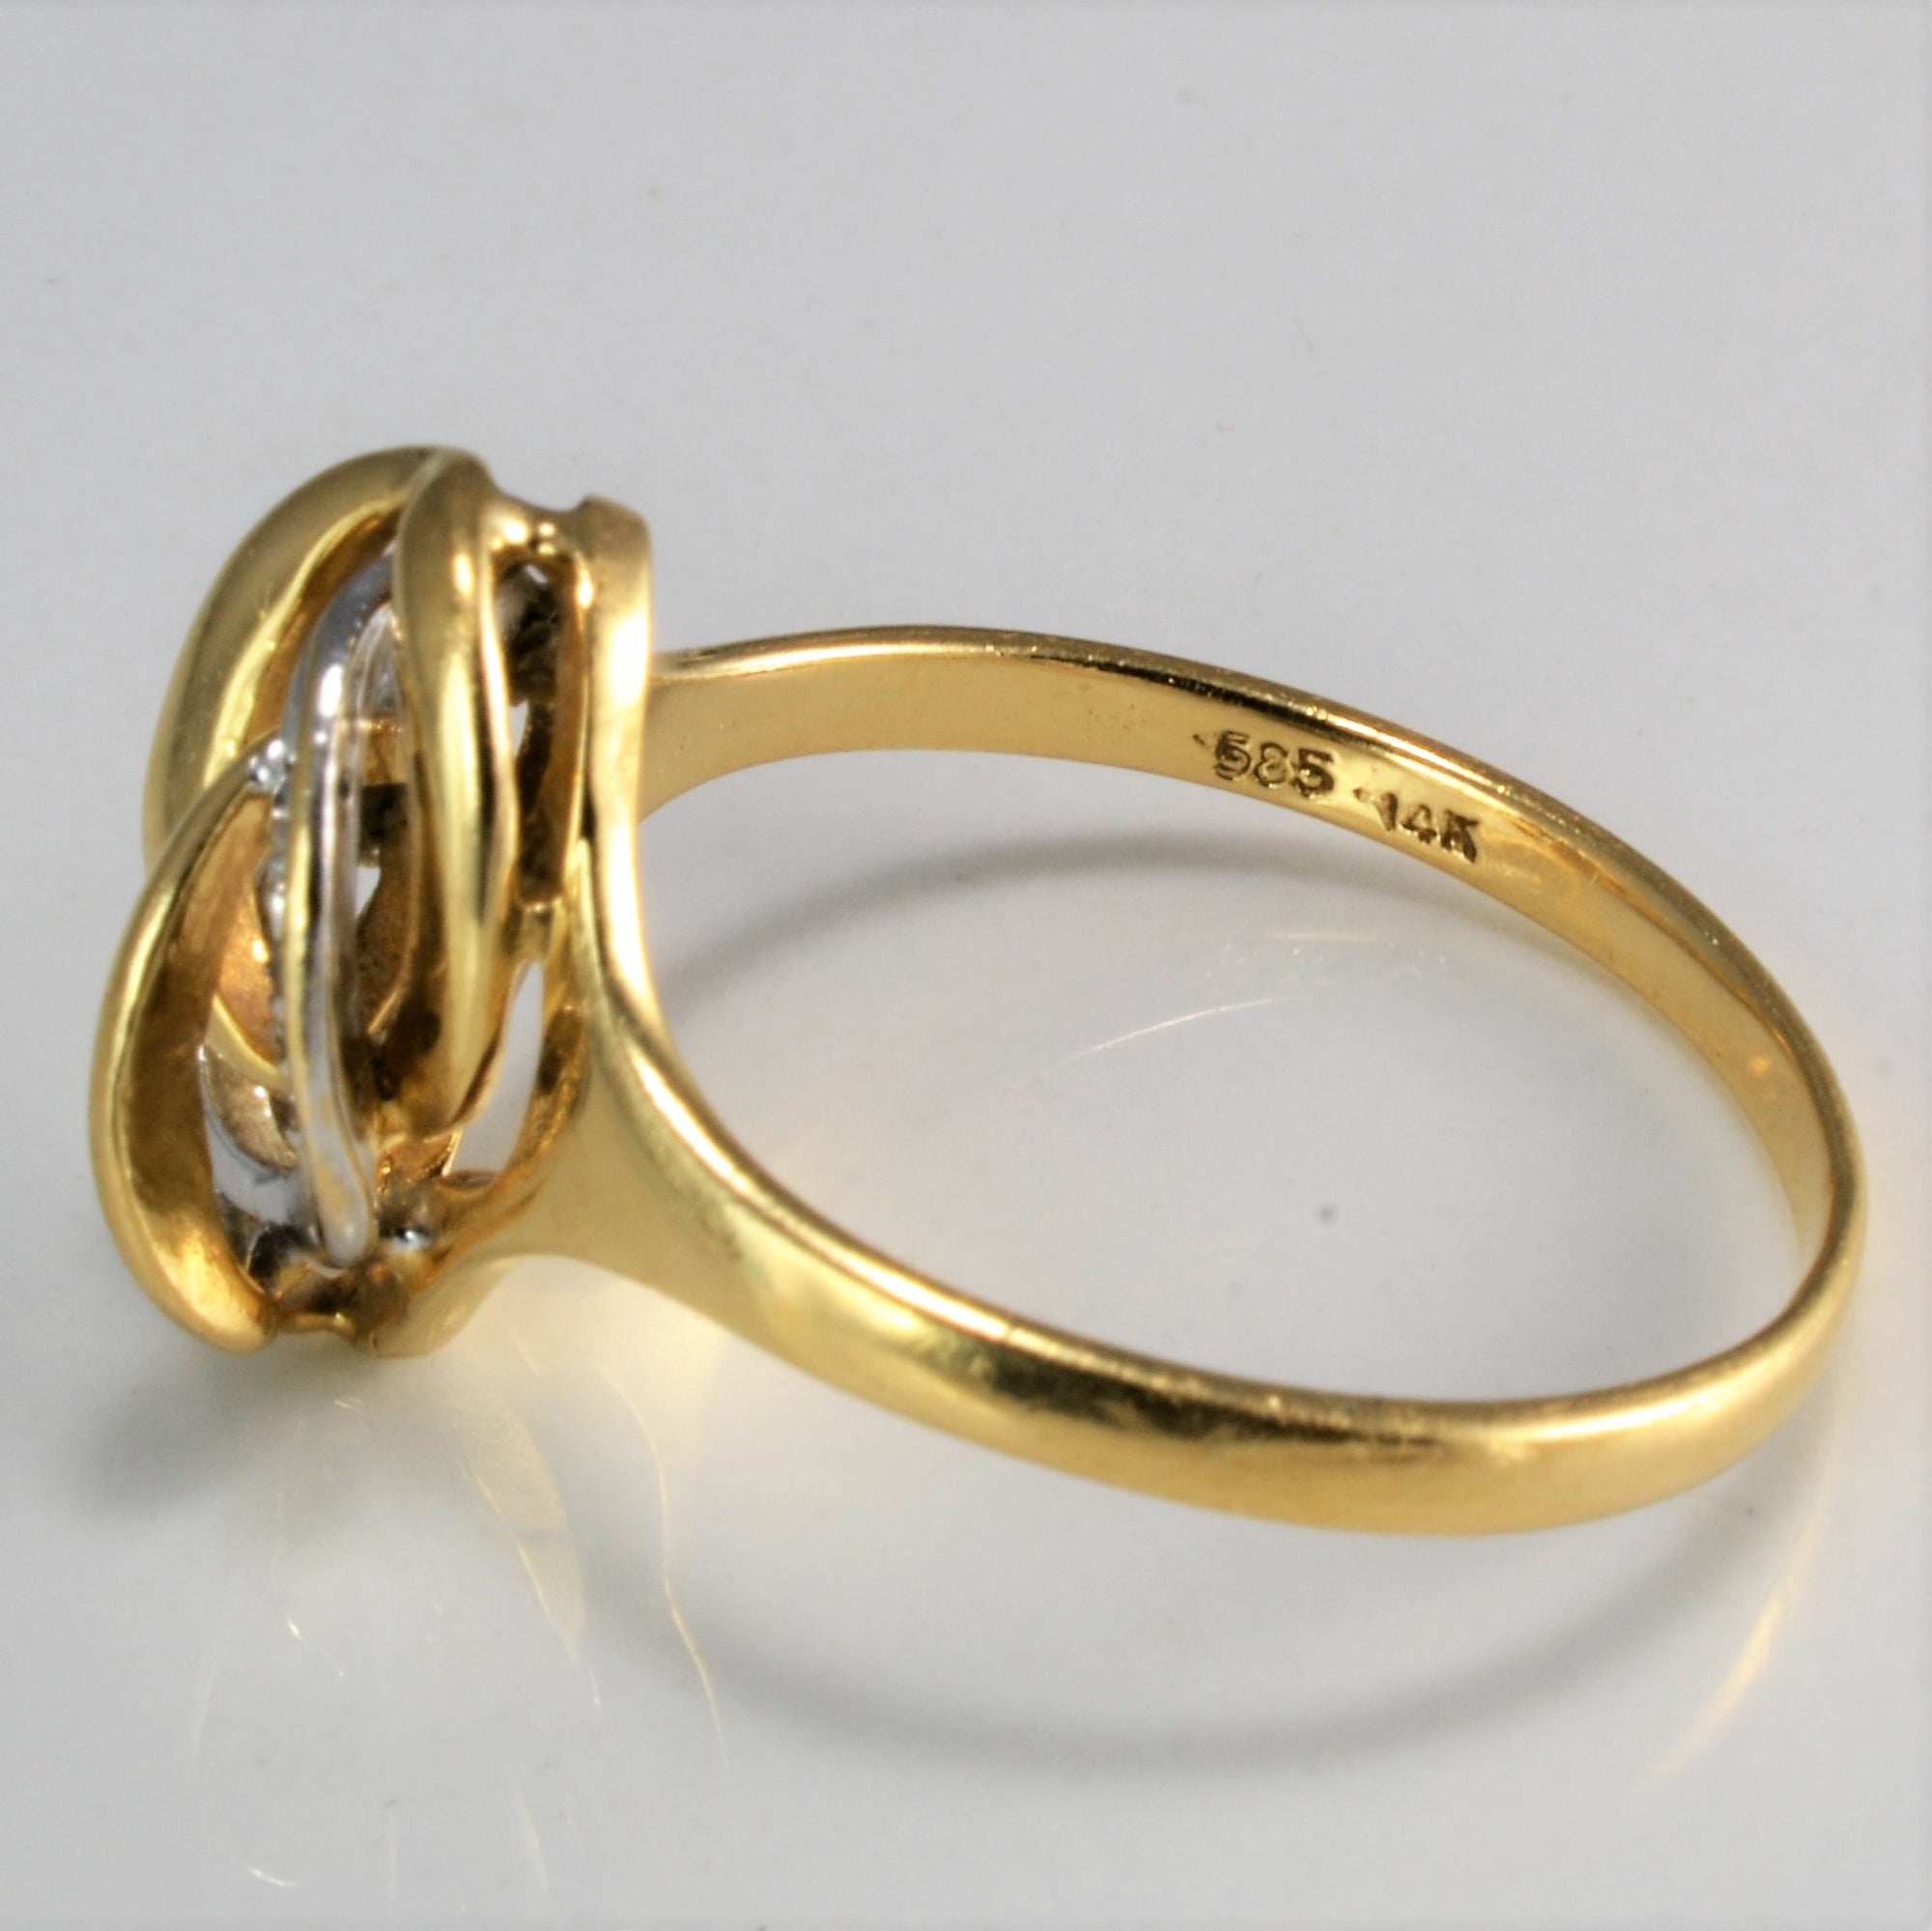 Two Tone Gold Intertwined Diamond Ring | 0.04 ctw, SZ 7.75 |